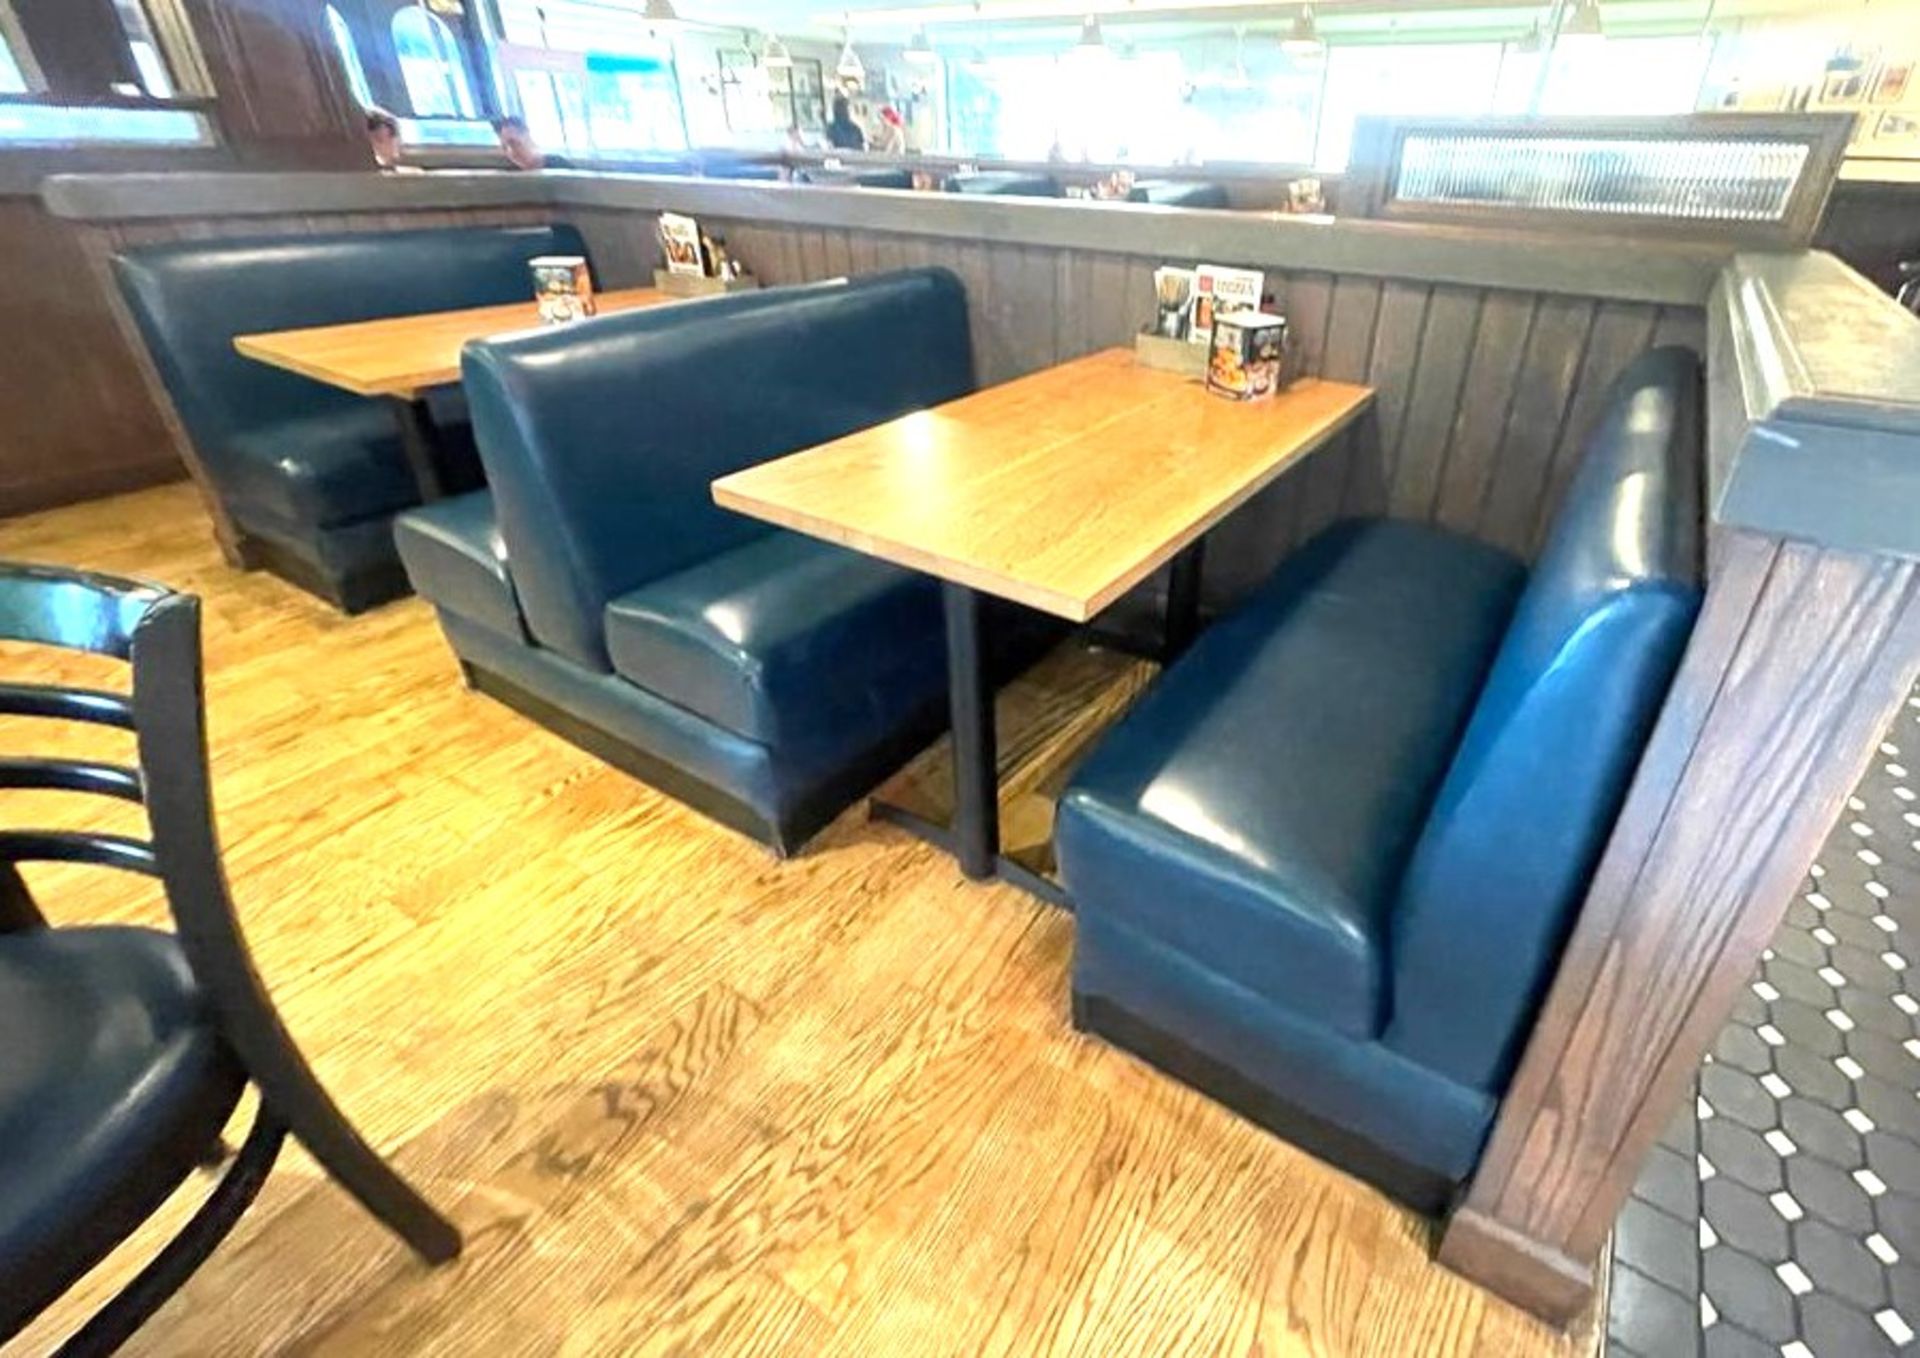 1 x Collection of Restaurant Booth Seating in a Dark Blue Faux Leather Upholstery